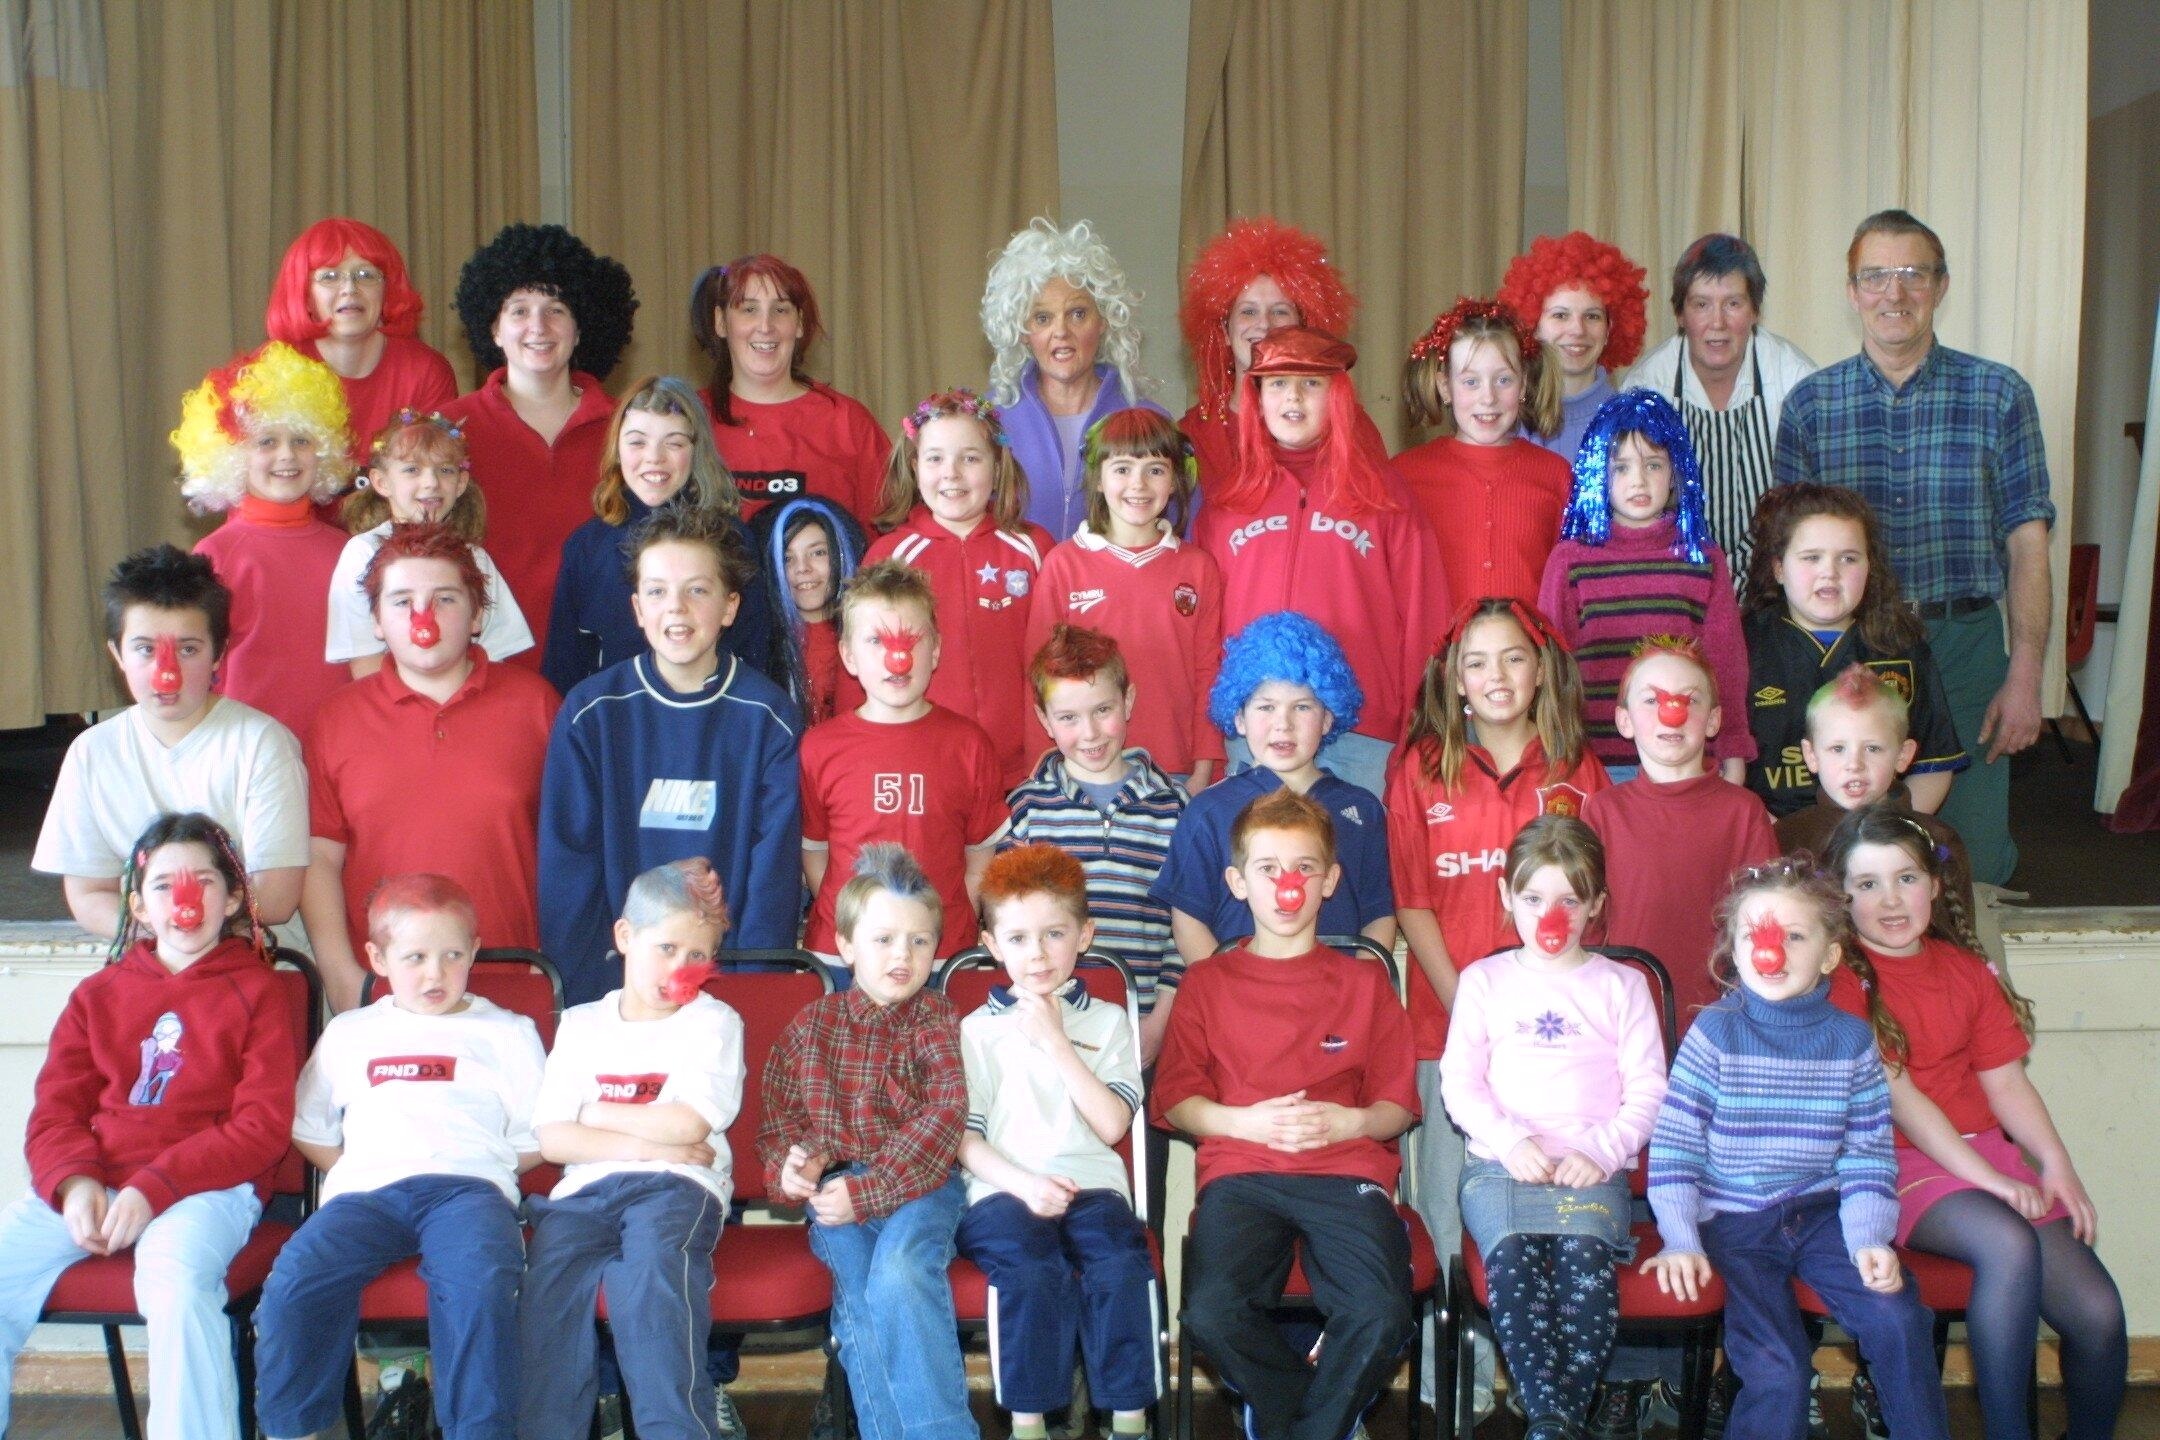 Llanwddyn Primary School children raised over £250 for Red Nose day from dressing up in red for the day pic are staff and children from the school.